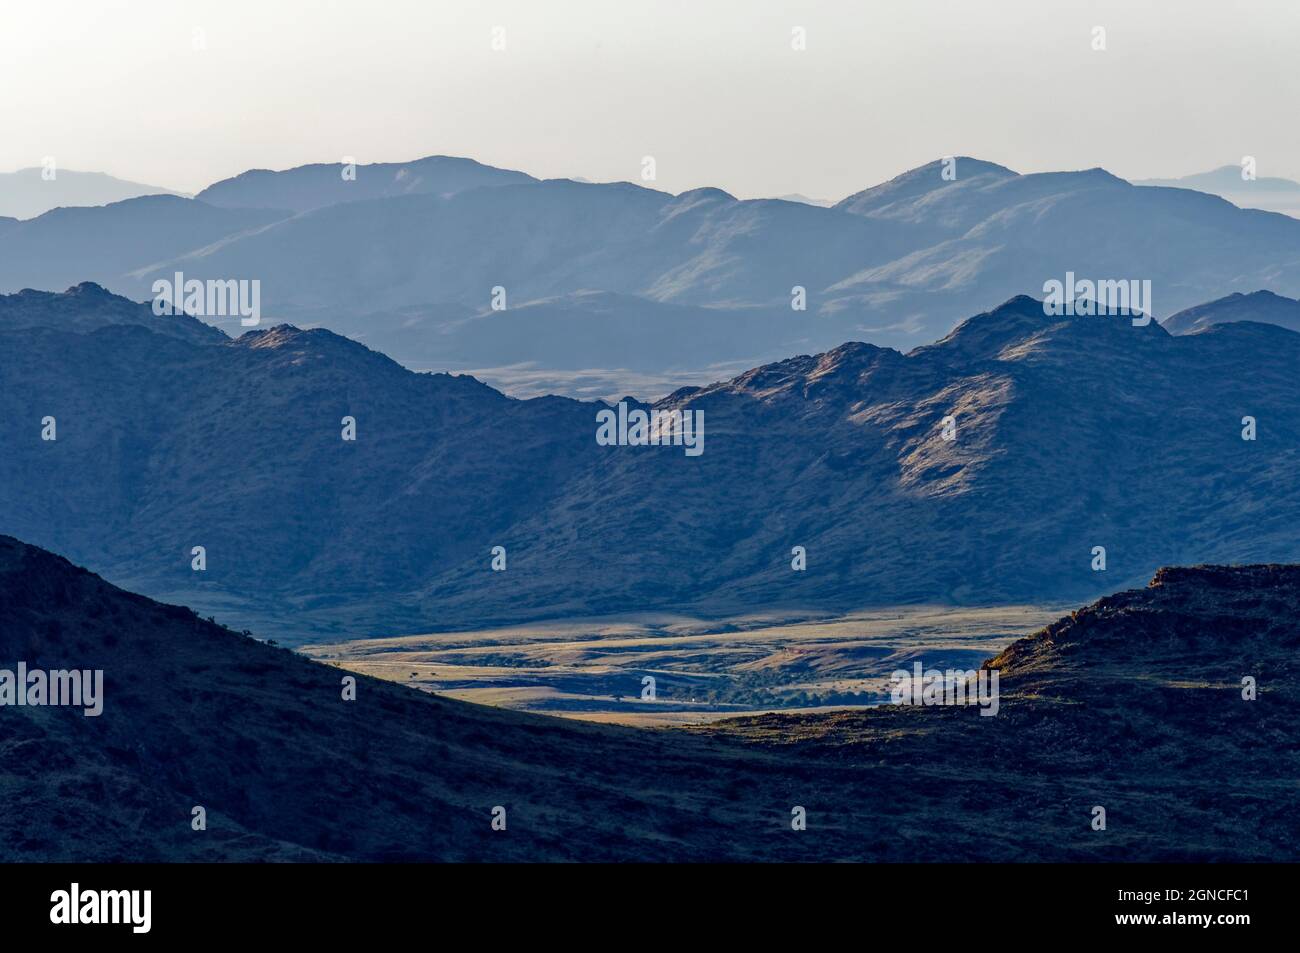 Khomas Highland near Nauchas: View from Spreetshoogte Pass to the Rant mountains (Rantberge), Windhoek District, Khomas region, Namibia Stock Photo